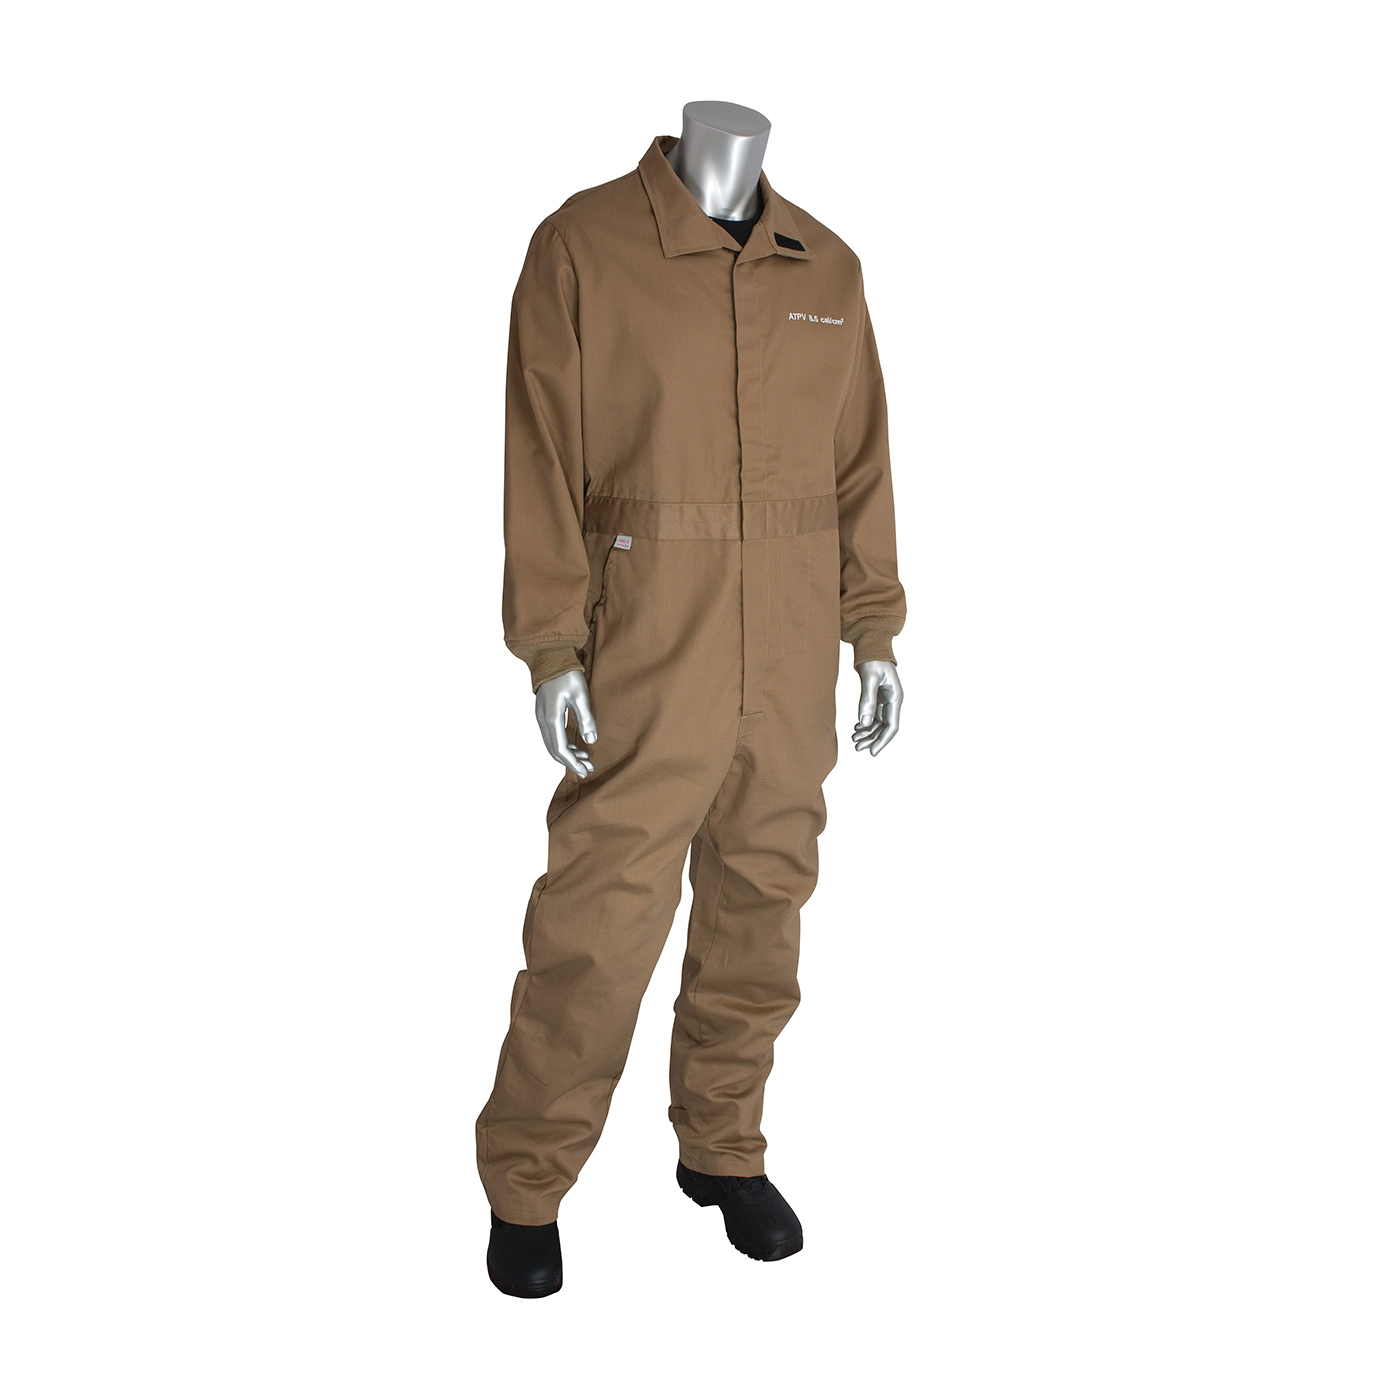 PIP® 9100-2100D/5X Flame Resistant Coverall With Vented Back, 5XL, Khaki, 90% Cotton/10% Nylon/FR Twill Weave, 64 to 66 in Chest, 32 in L Inseam